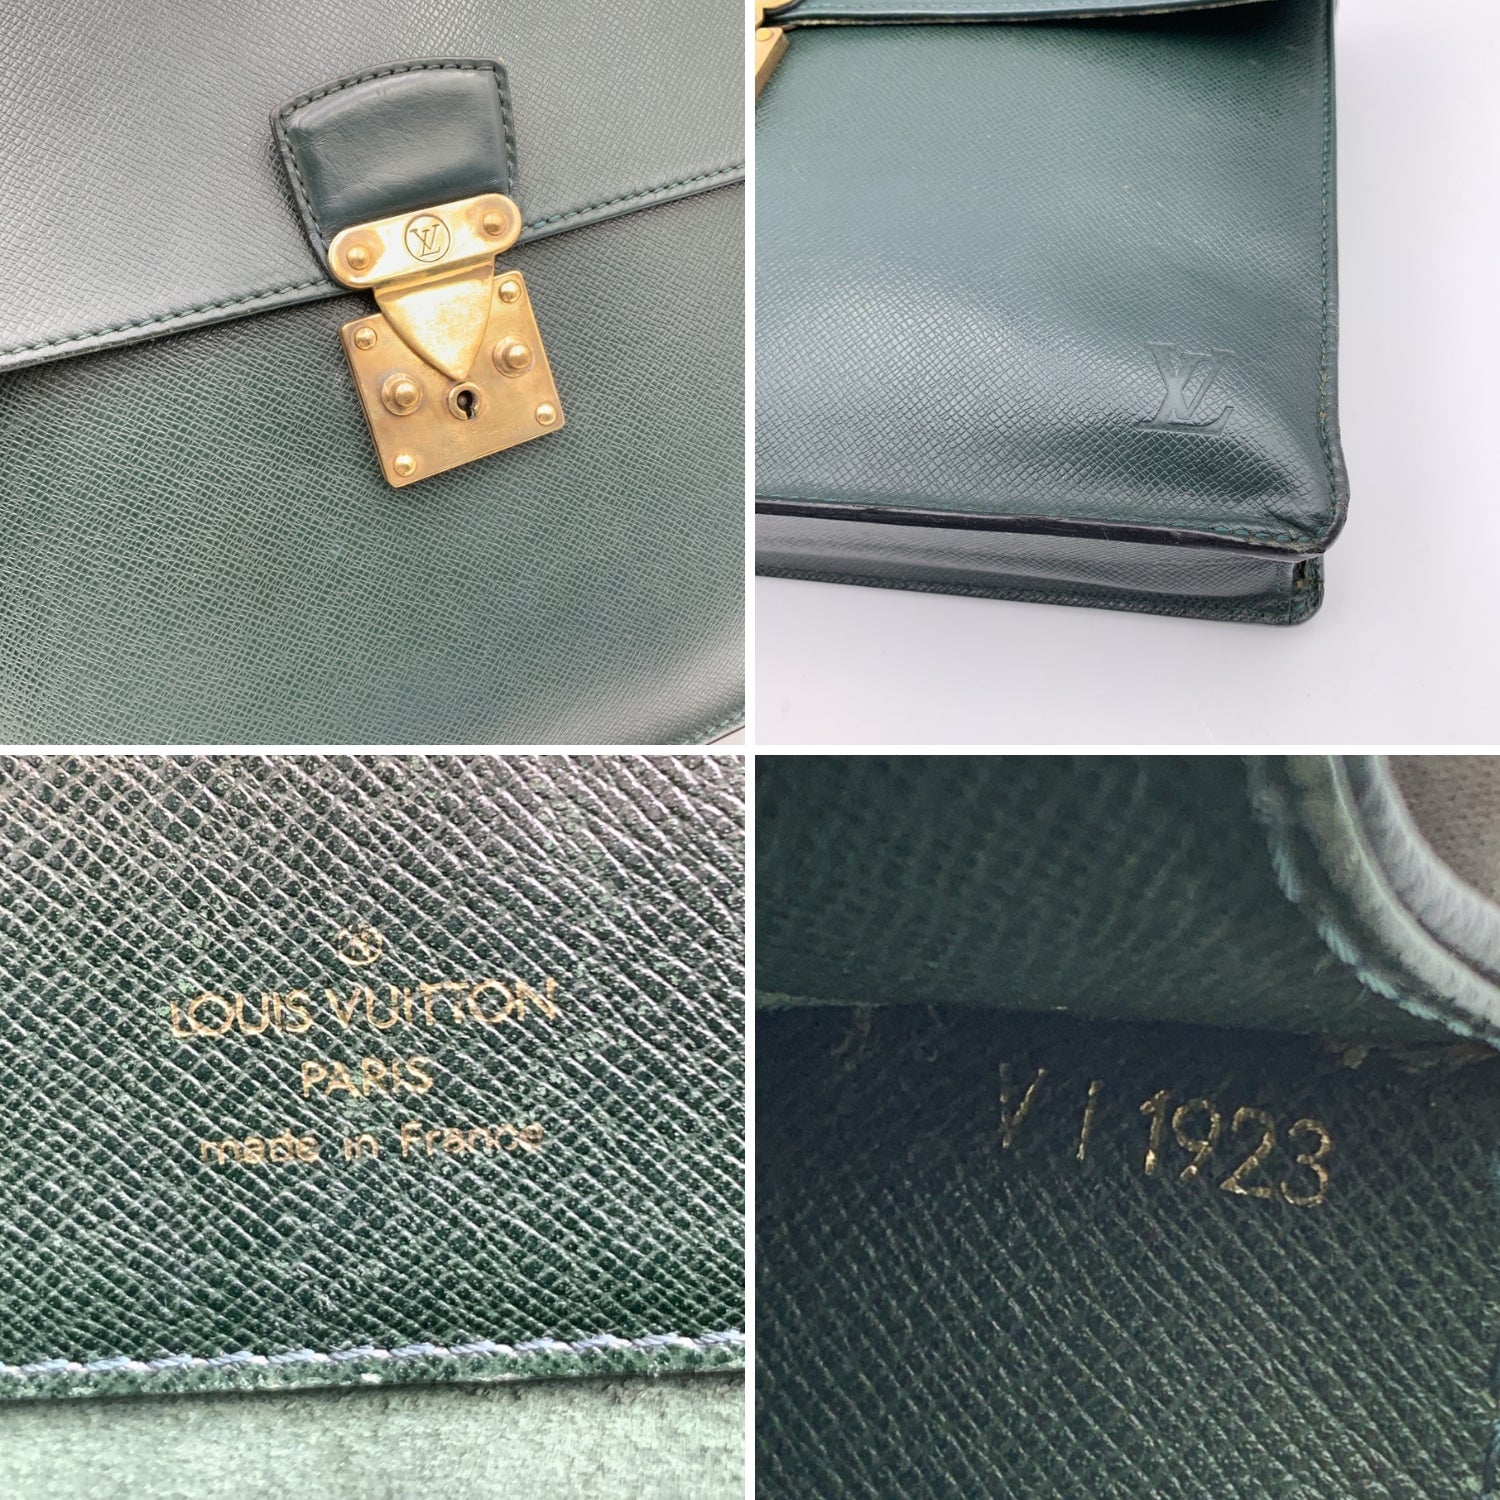 TOP Robusto Briefcase Taiga Leather In Green Black Tote Bag Woman Fashion  Classic Handbag Cowhide Leather Trim Signature Pin Lo265v From Uwmgut,  $256.4